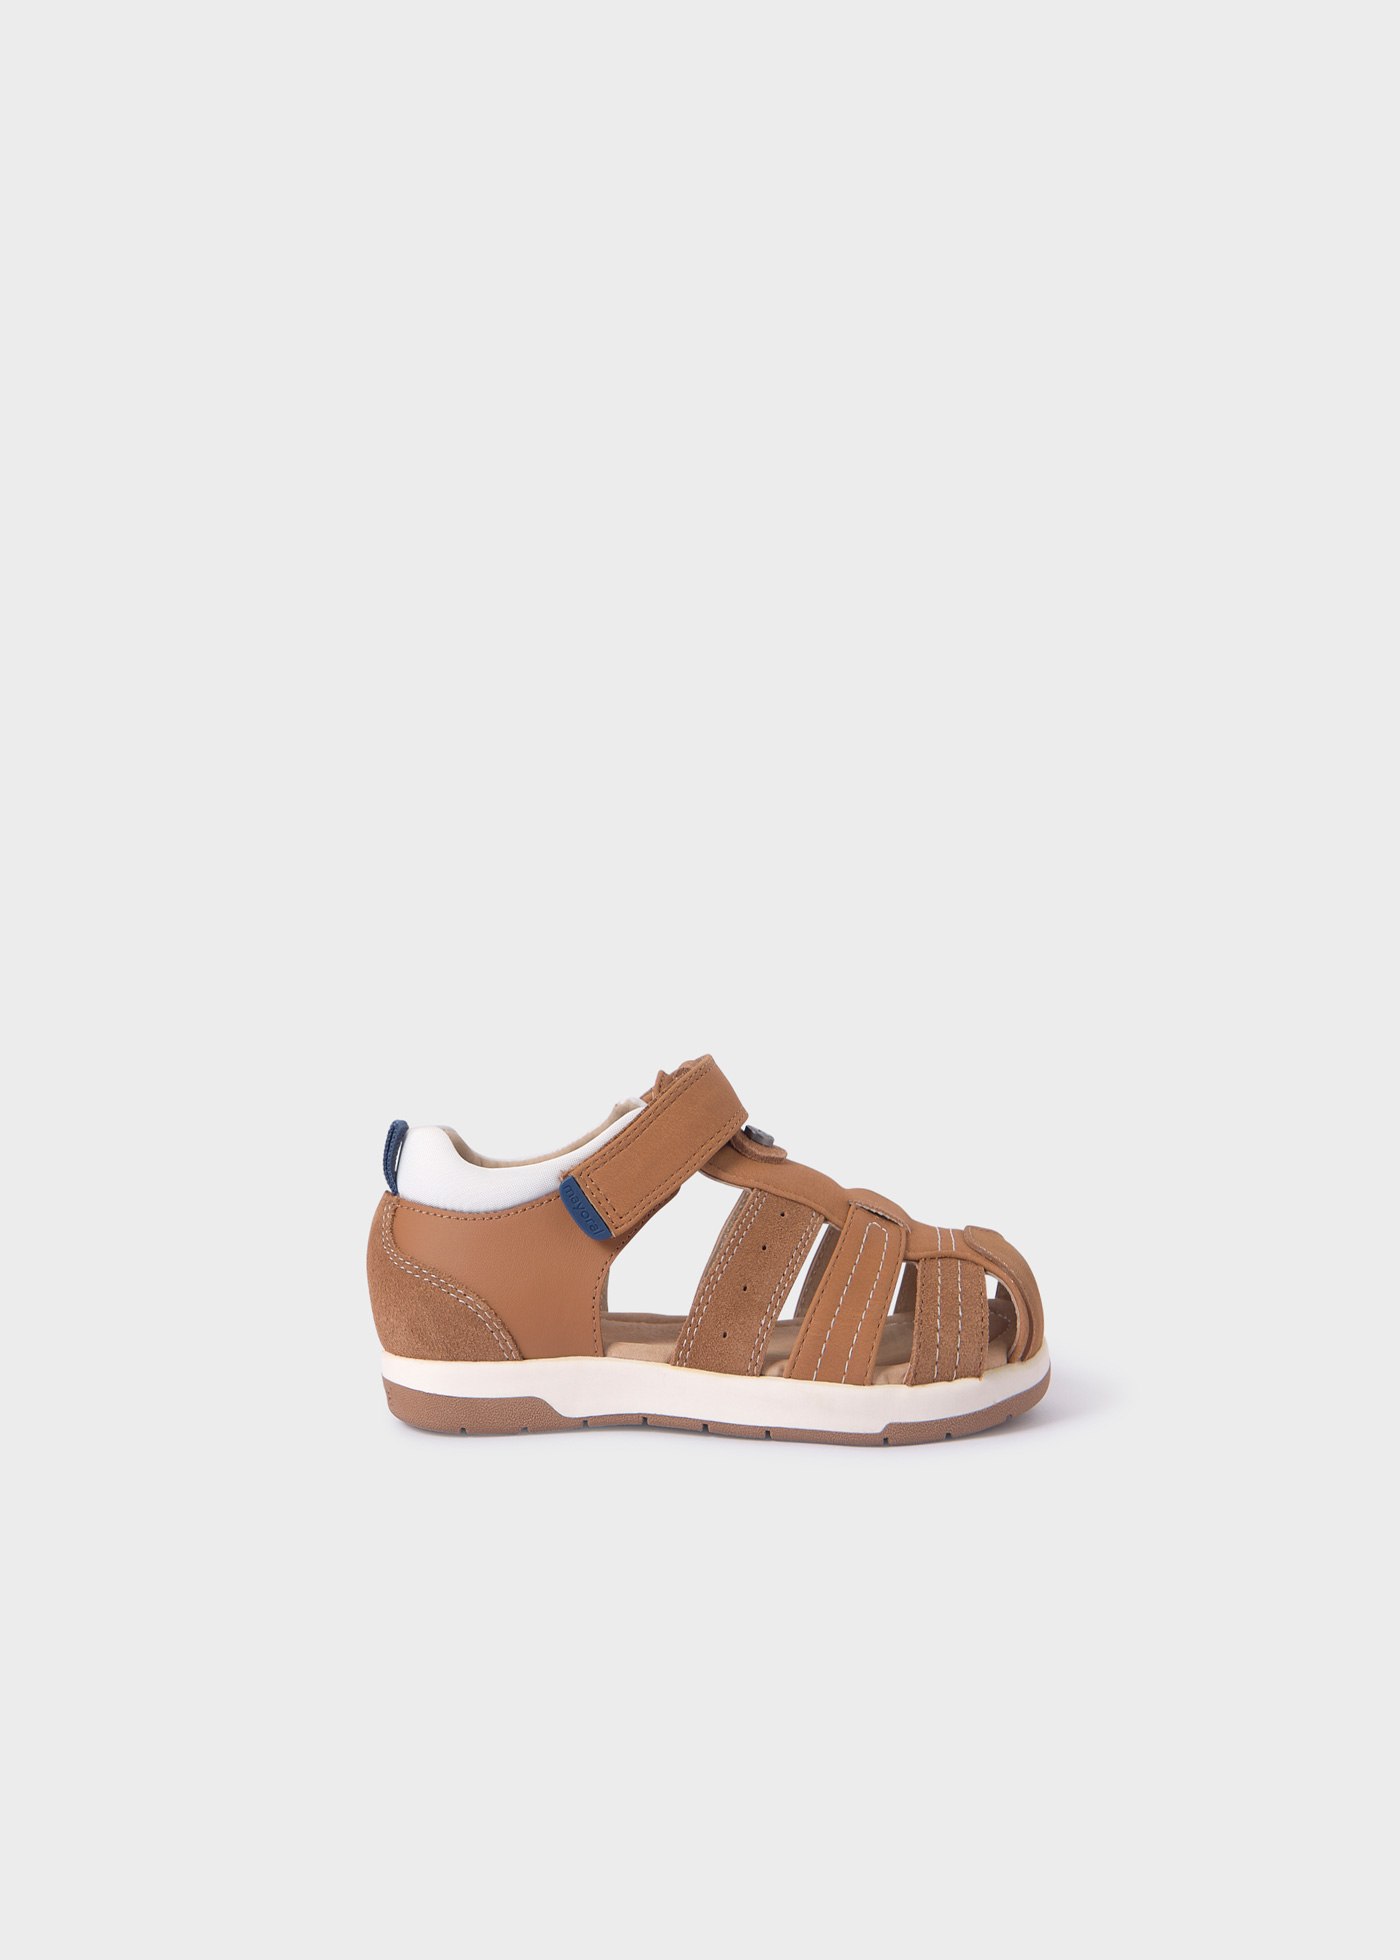 Baby Sandals Sustainable Leather